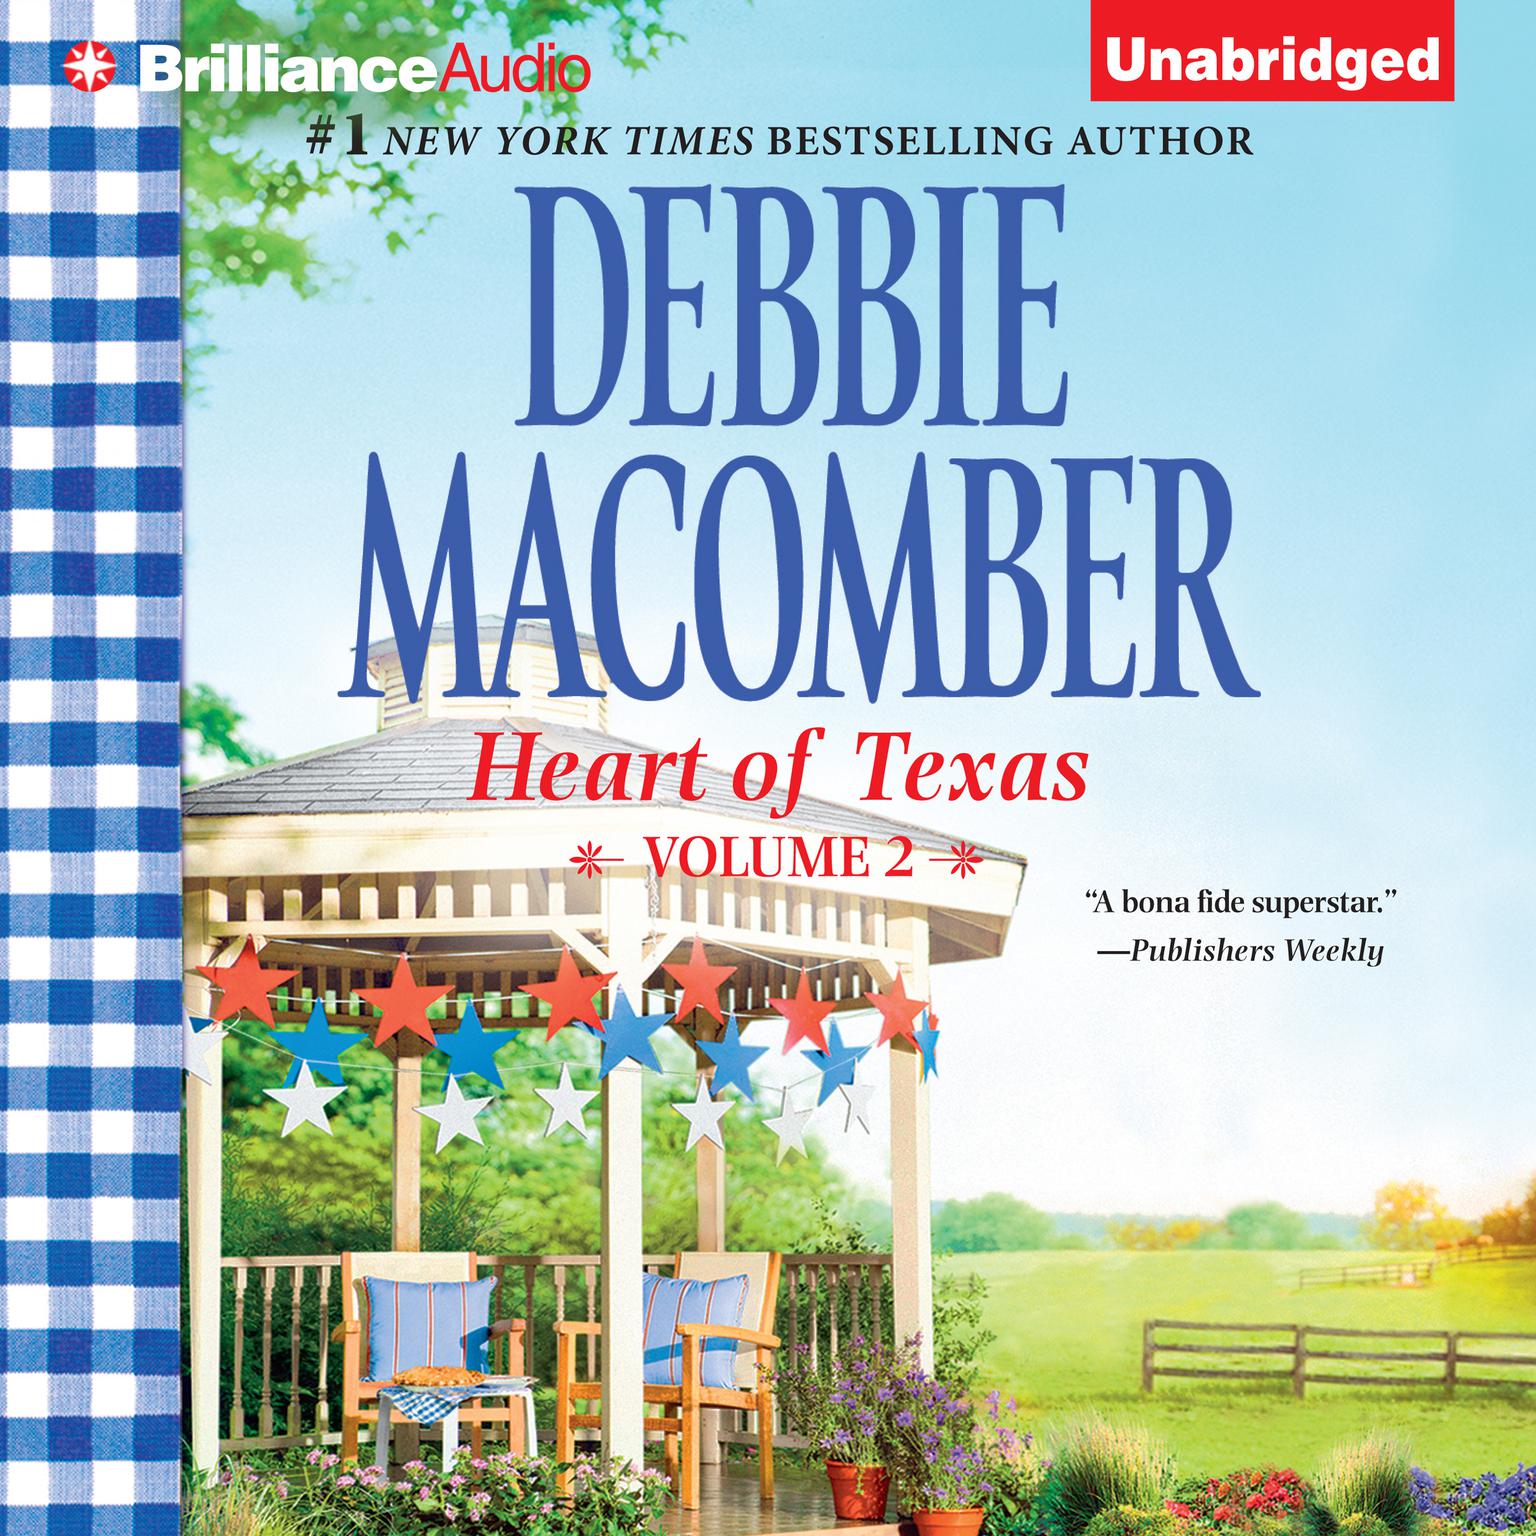 Heart of Texas, Volume 2: Carolines Child and Dr. Texas Audiobook, by Debbie Macomber